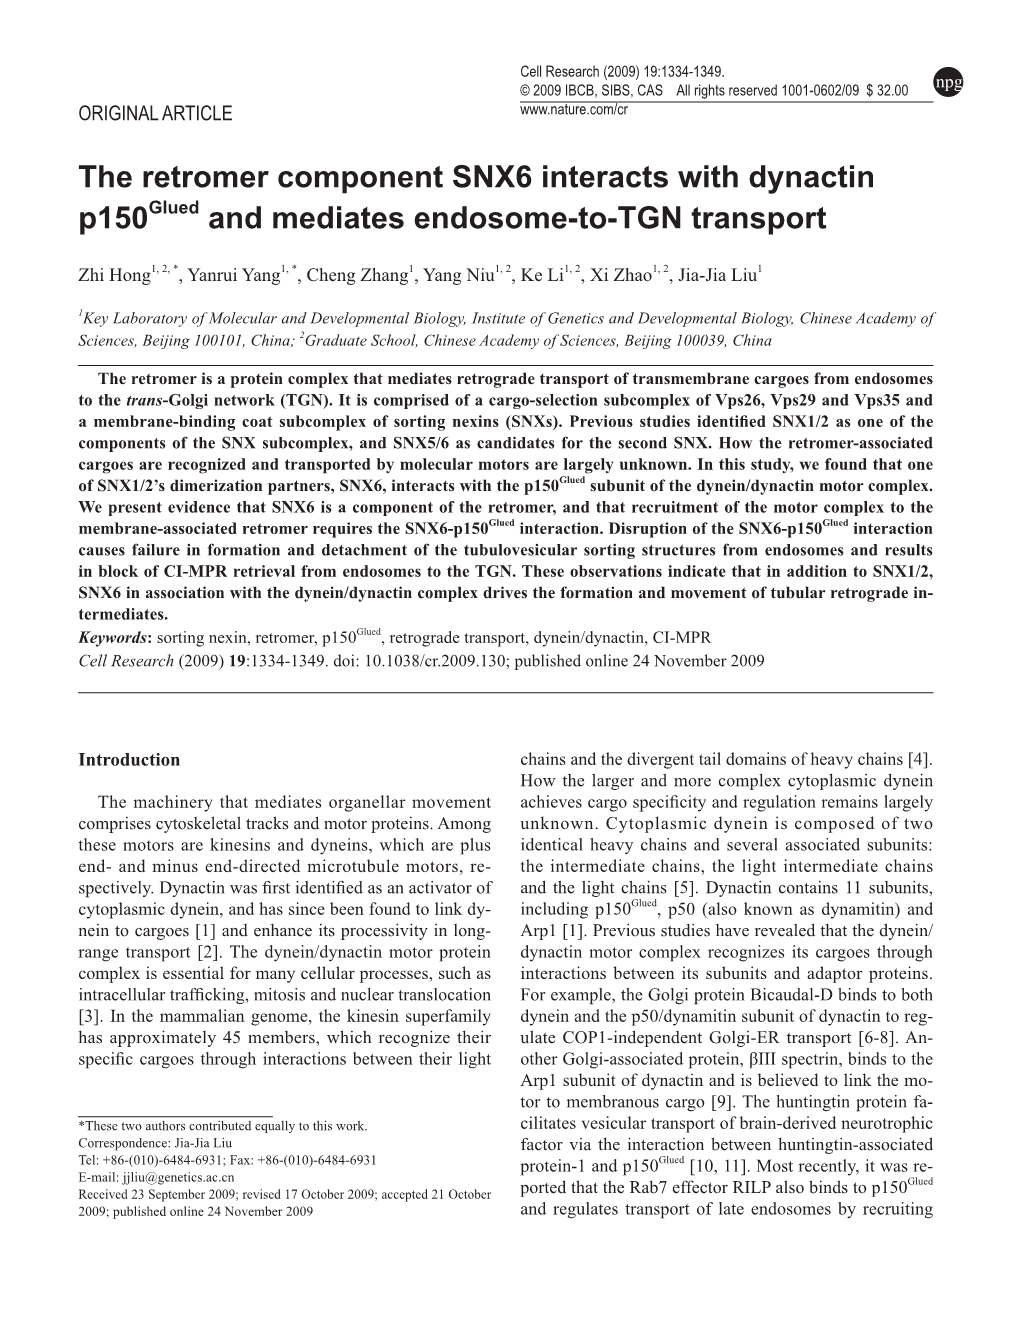 The Retromer Component SNX6 Interacts with Dynactin P150glued and Mediates Endosome-To-TGN Transport